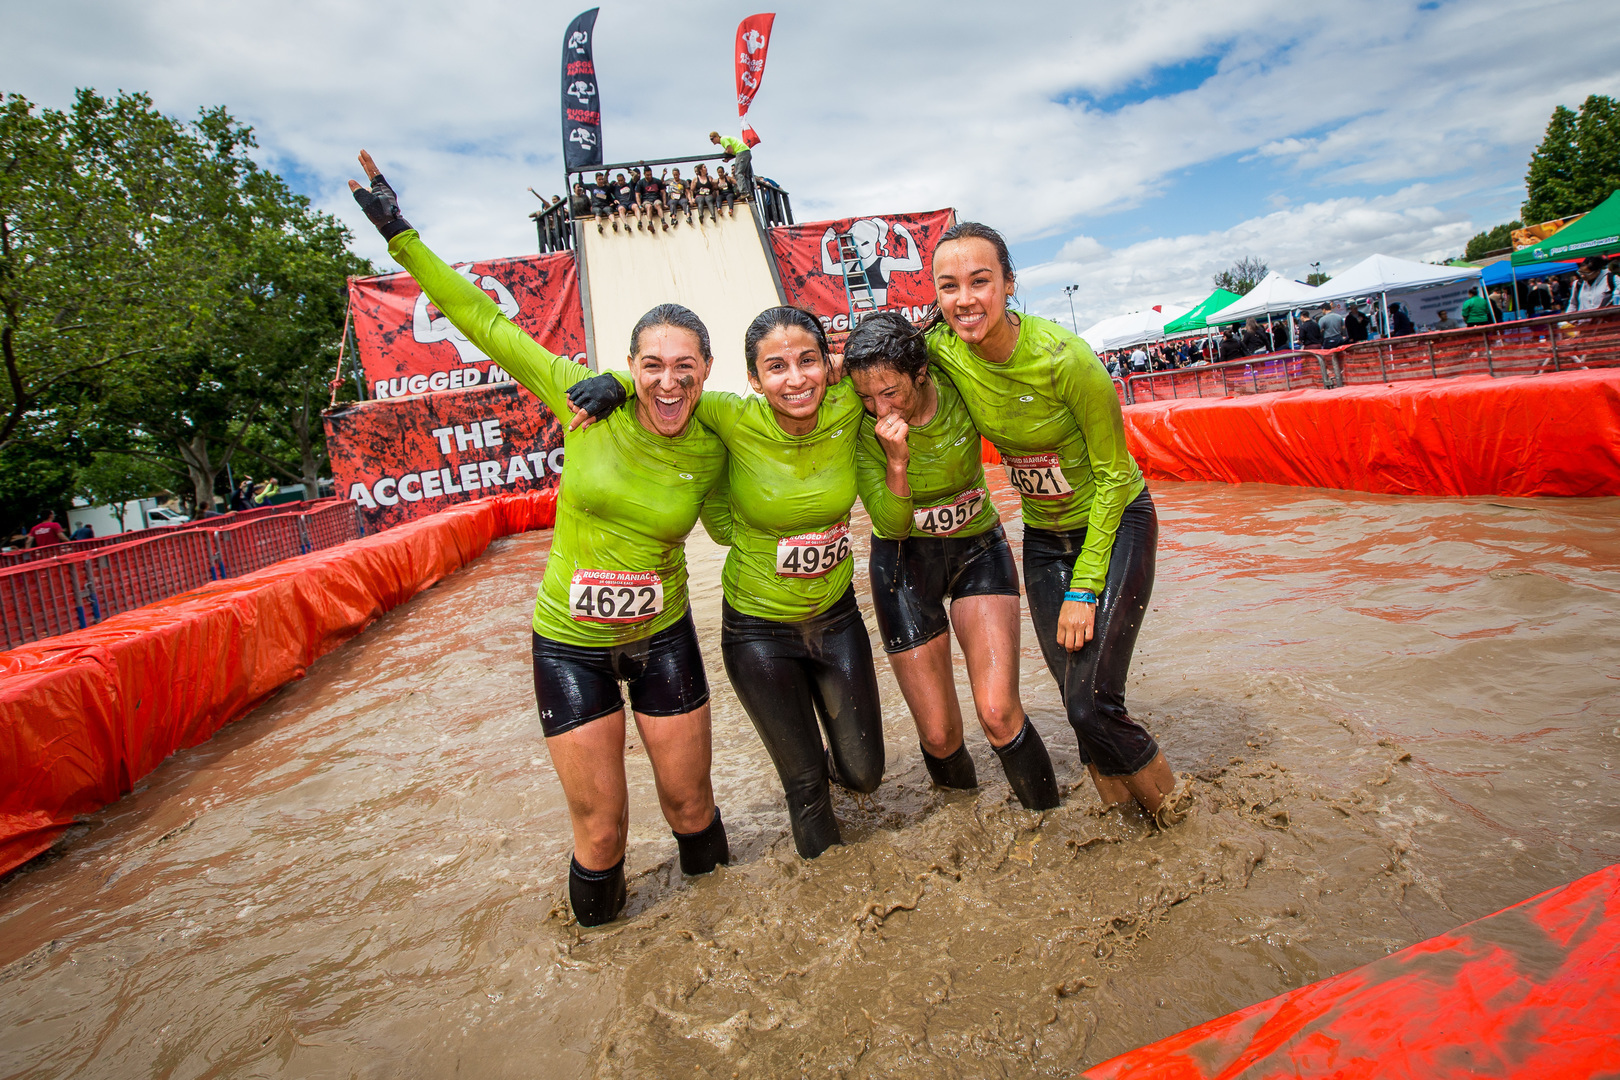 Rugged Maniac 5k Obstacle Race - Vancouver, Surrey, British Columbia, Canada